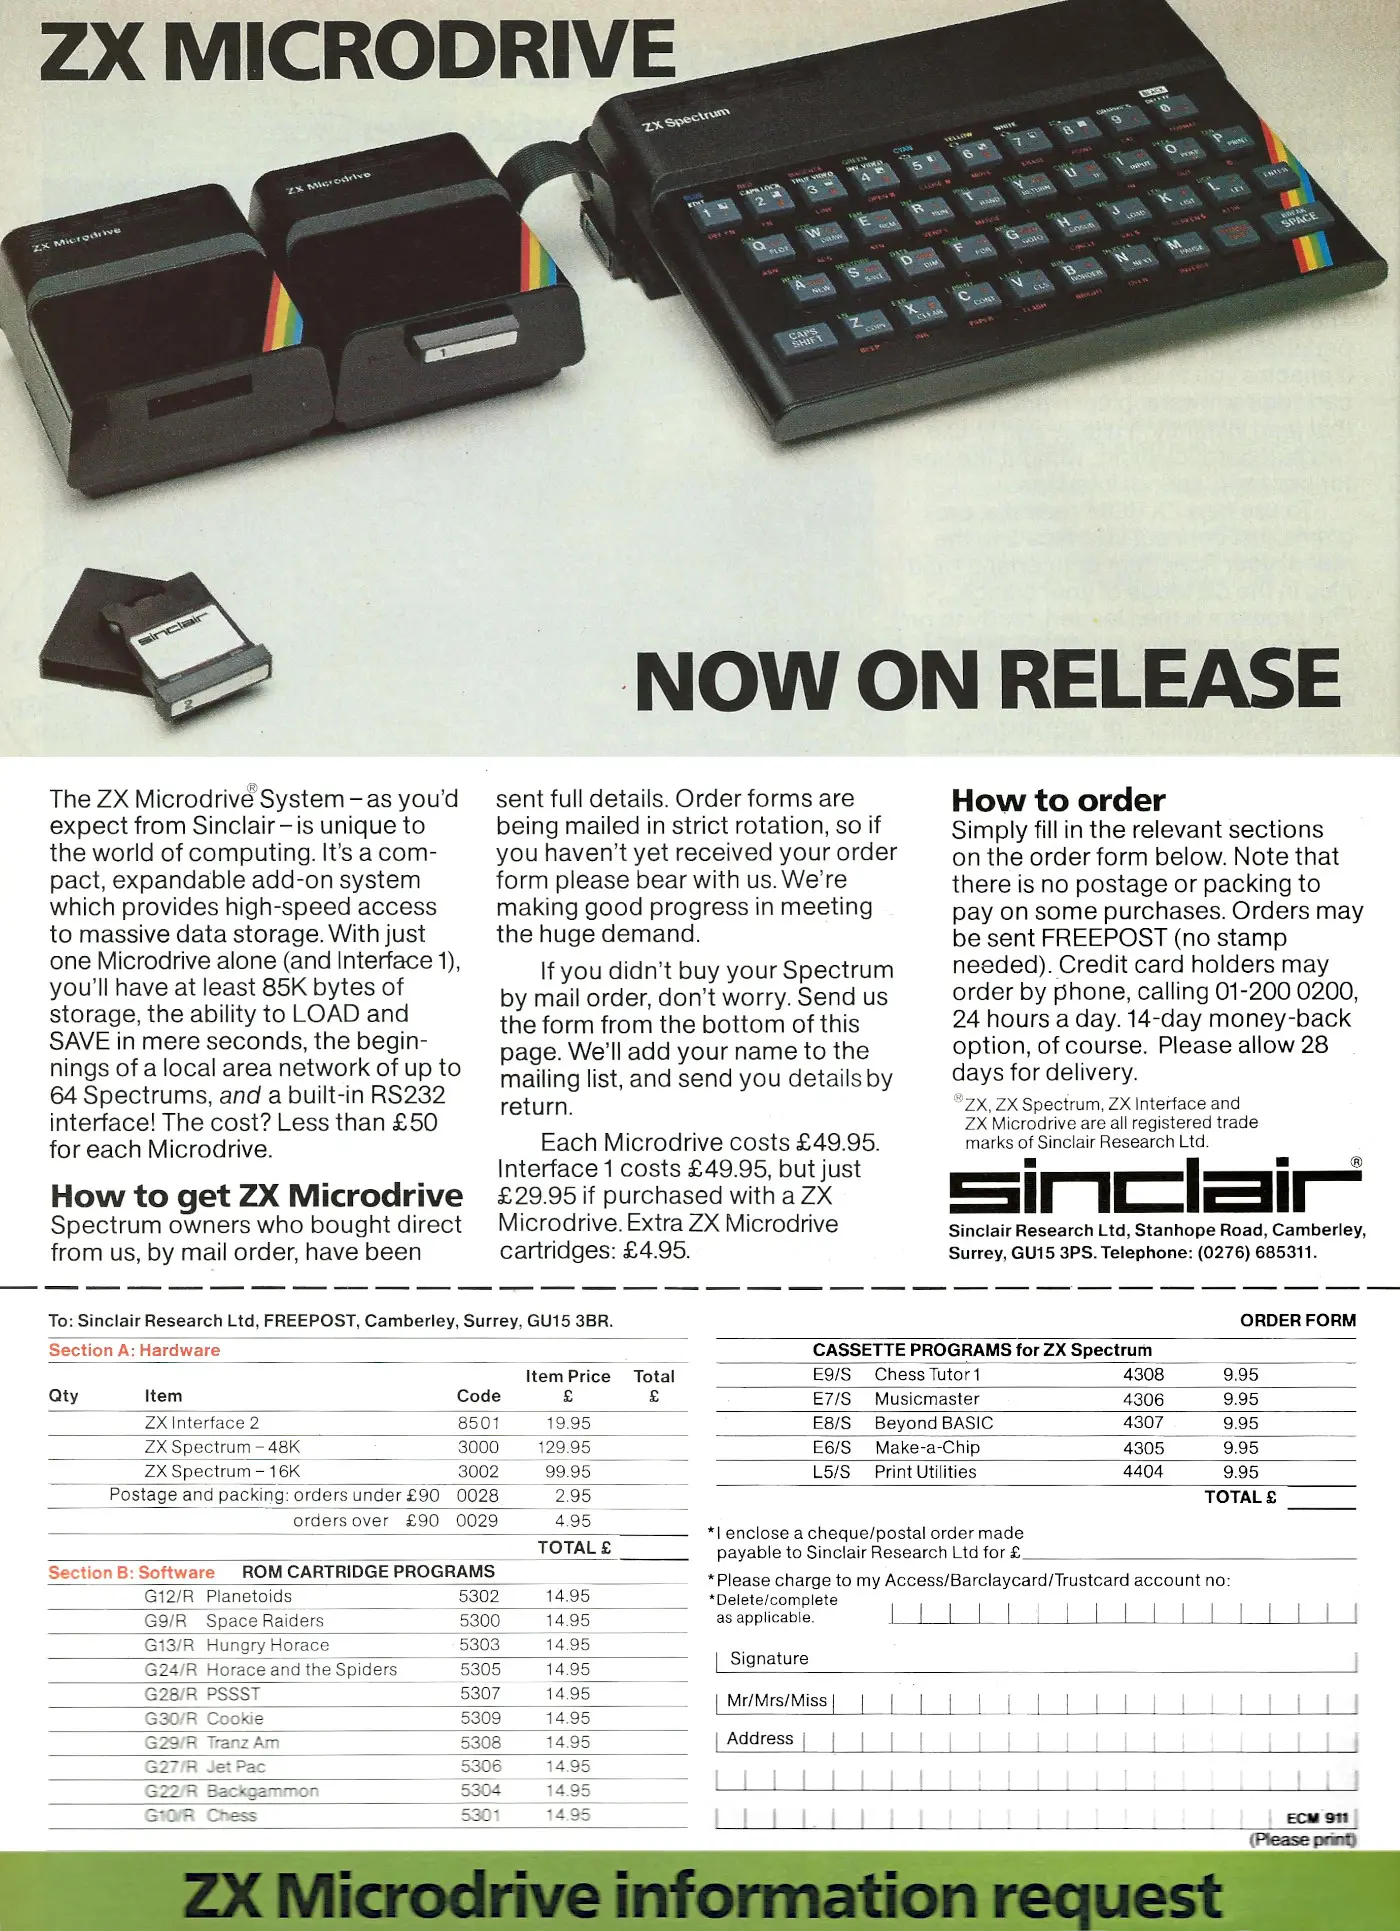 Sinclair Advert: ZX Microdrive - Now on release, from Electronics and Computing Monthly, November 1983